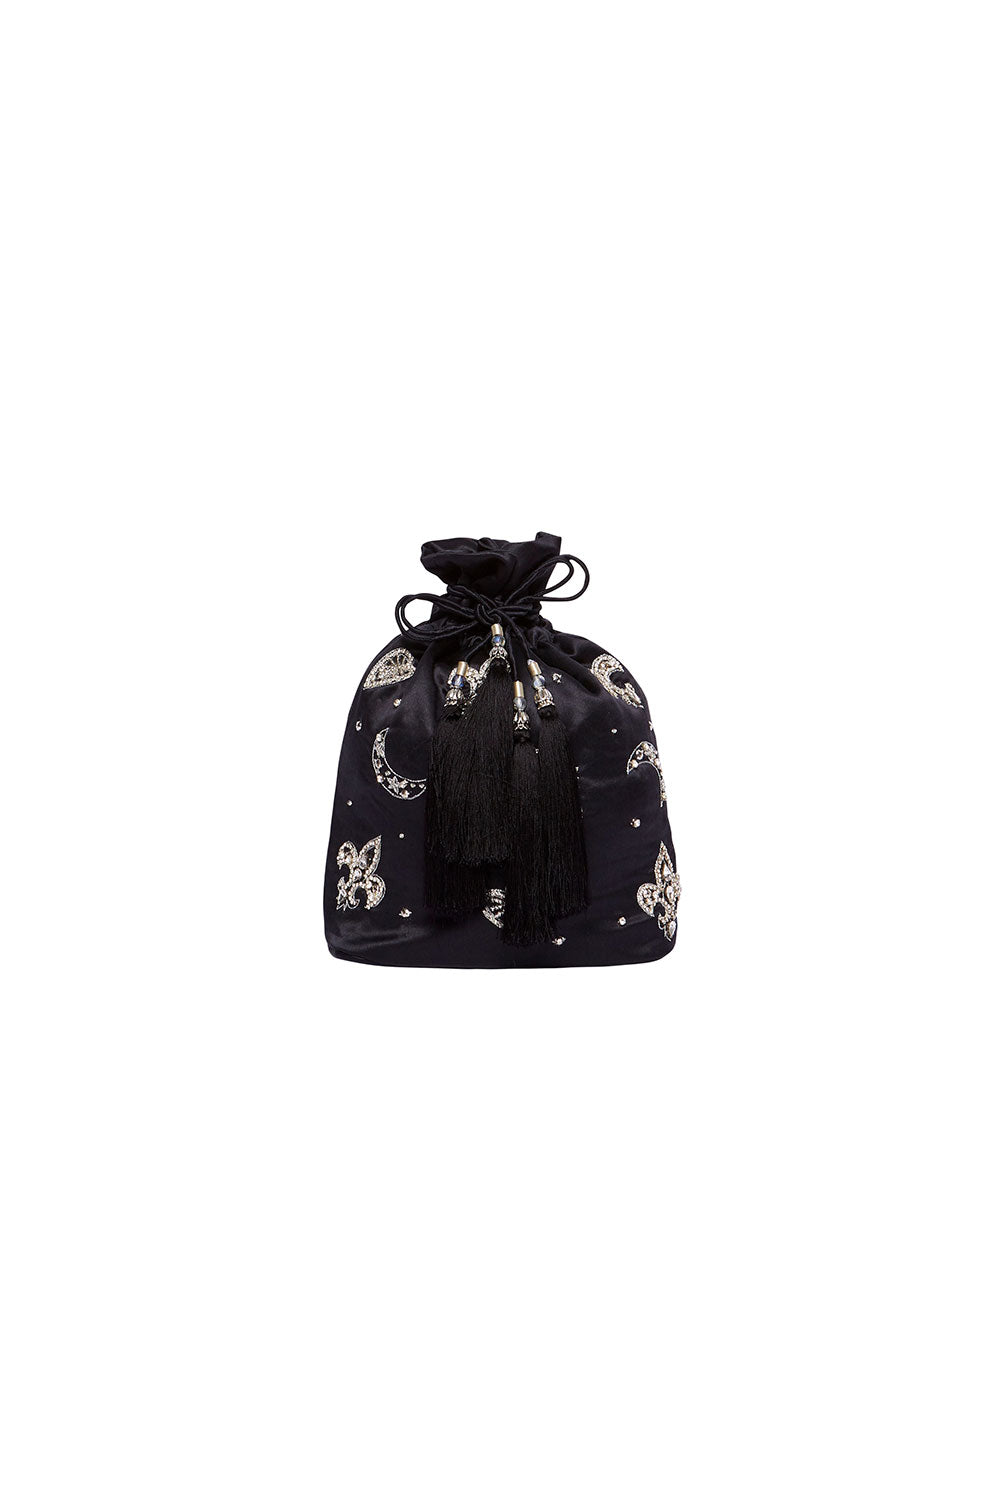 DRAWSTRING POUCH BLACK CONTEMPORARY